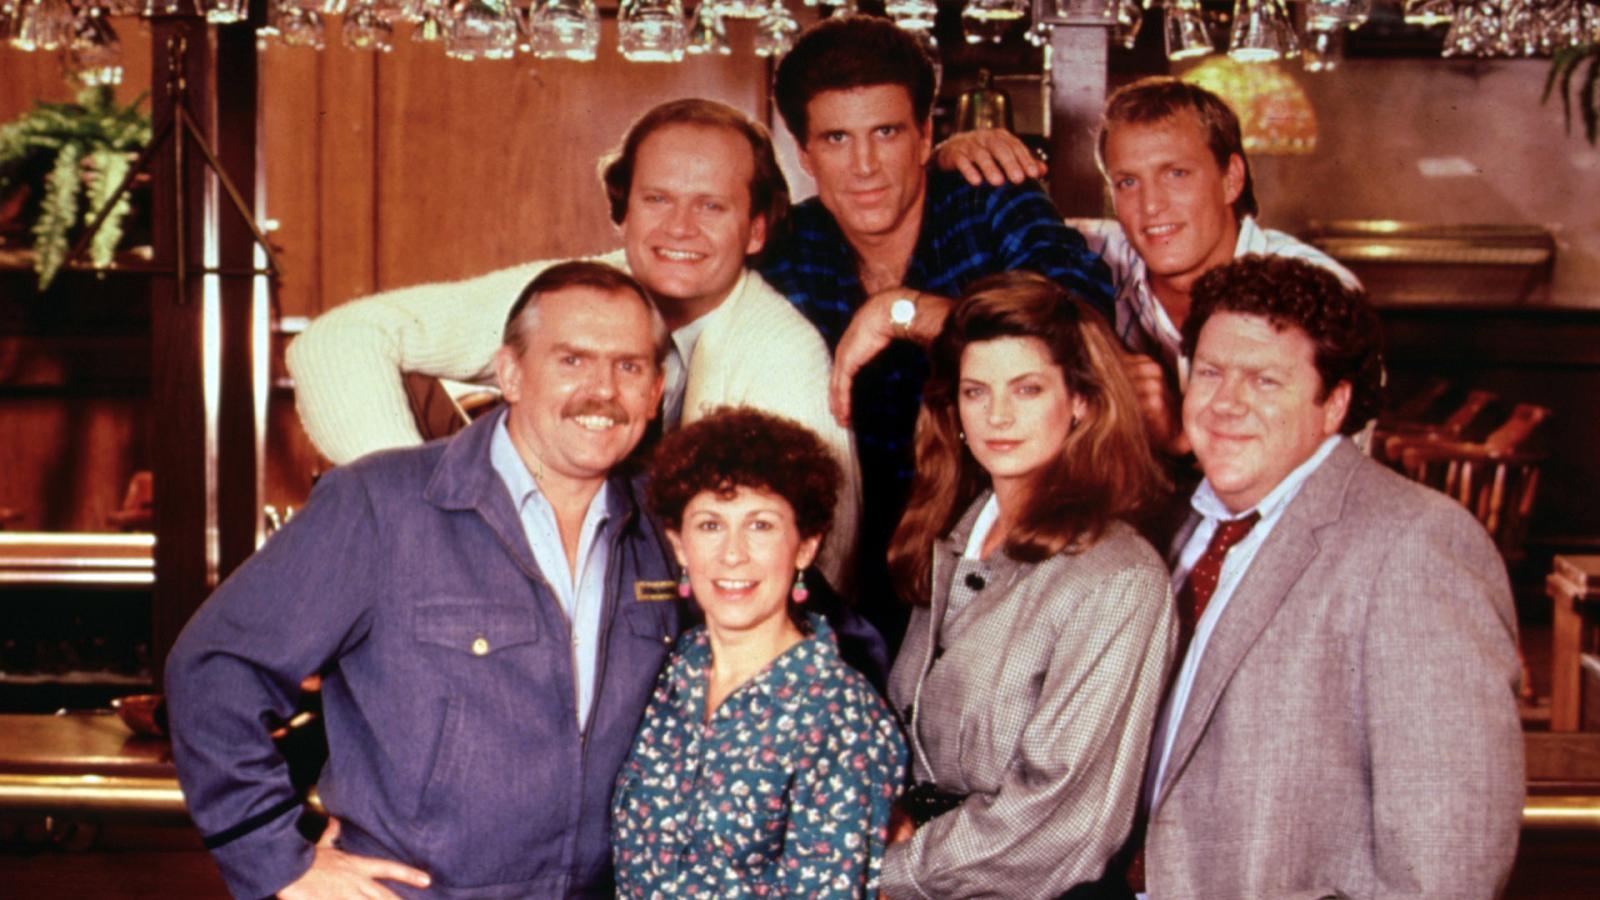 10 Classic TV Shows That Still Hold Up Decades Later (Not Friends, Though) - image 6